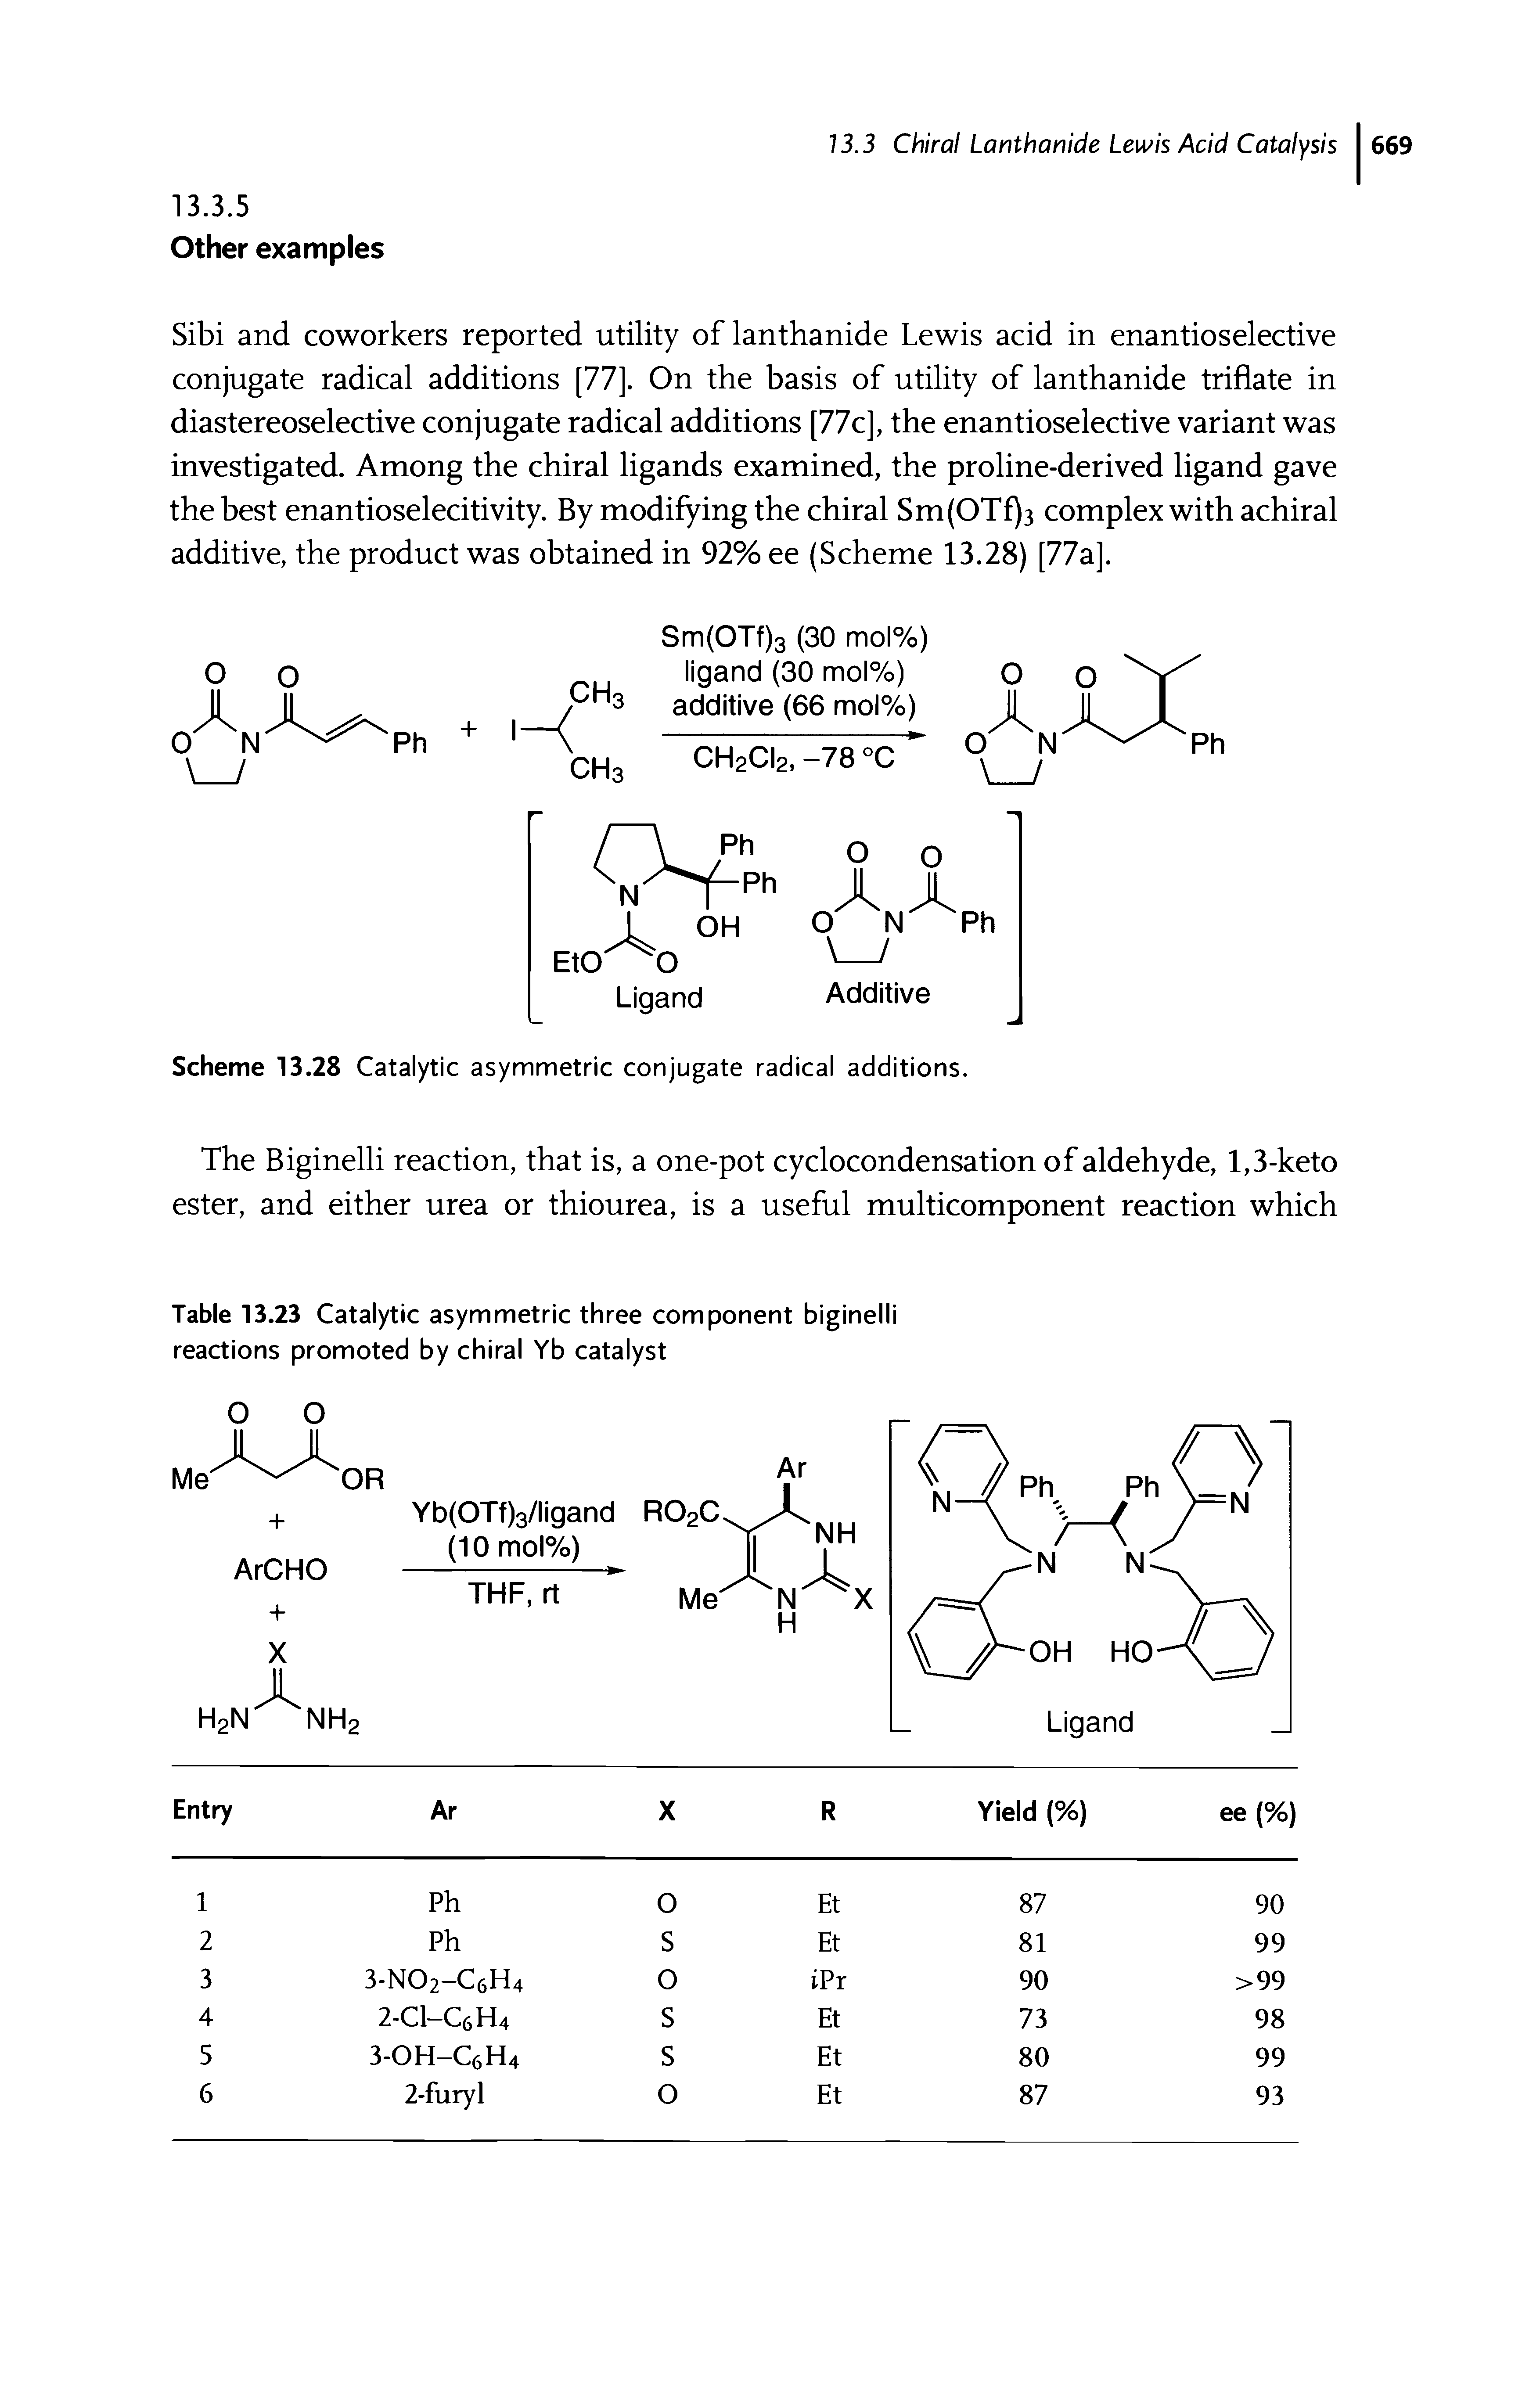 Table 13.23 Catalytic asymmetric three component biginelli reactions promoted by chiral Yb catalyst...